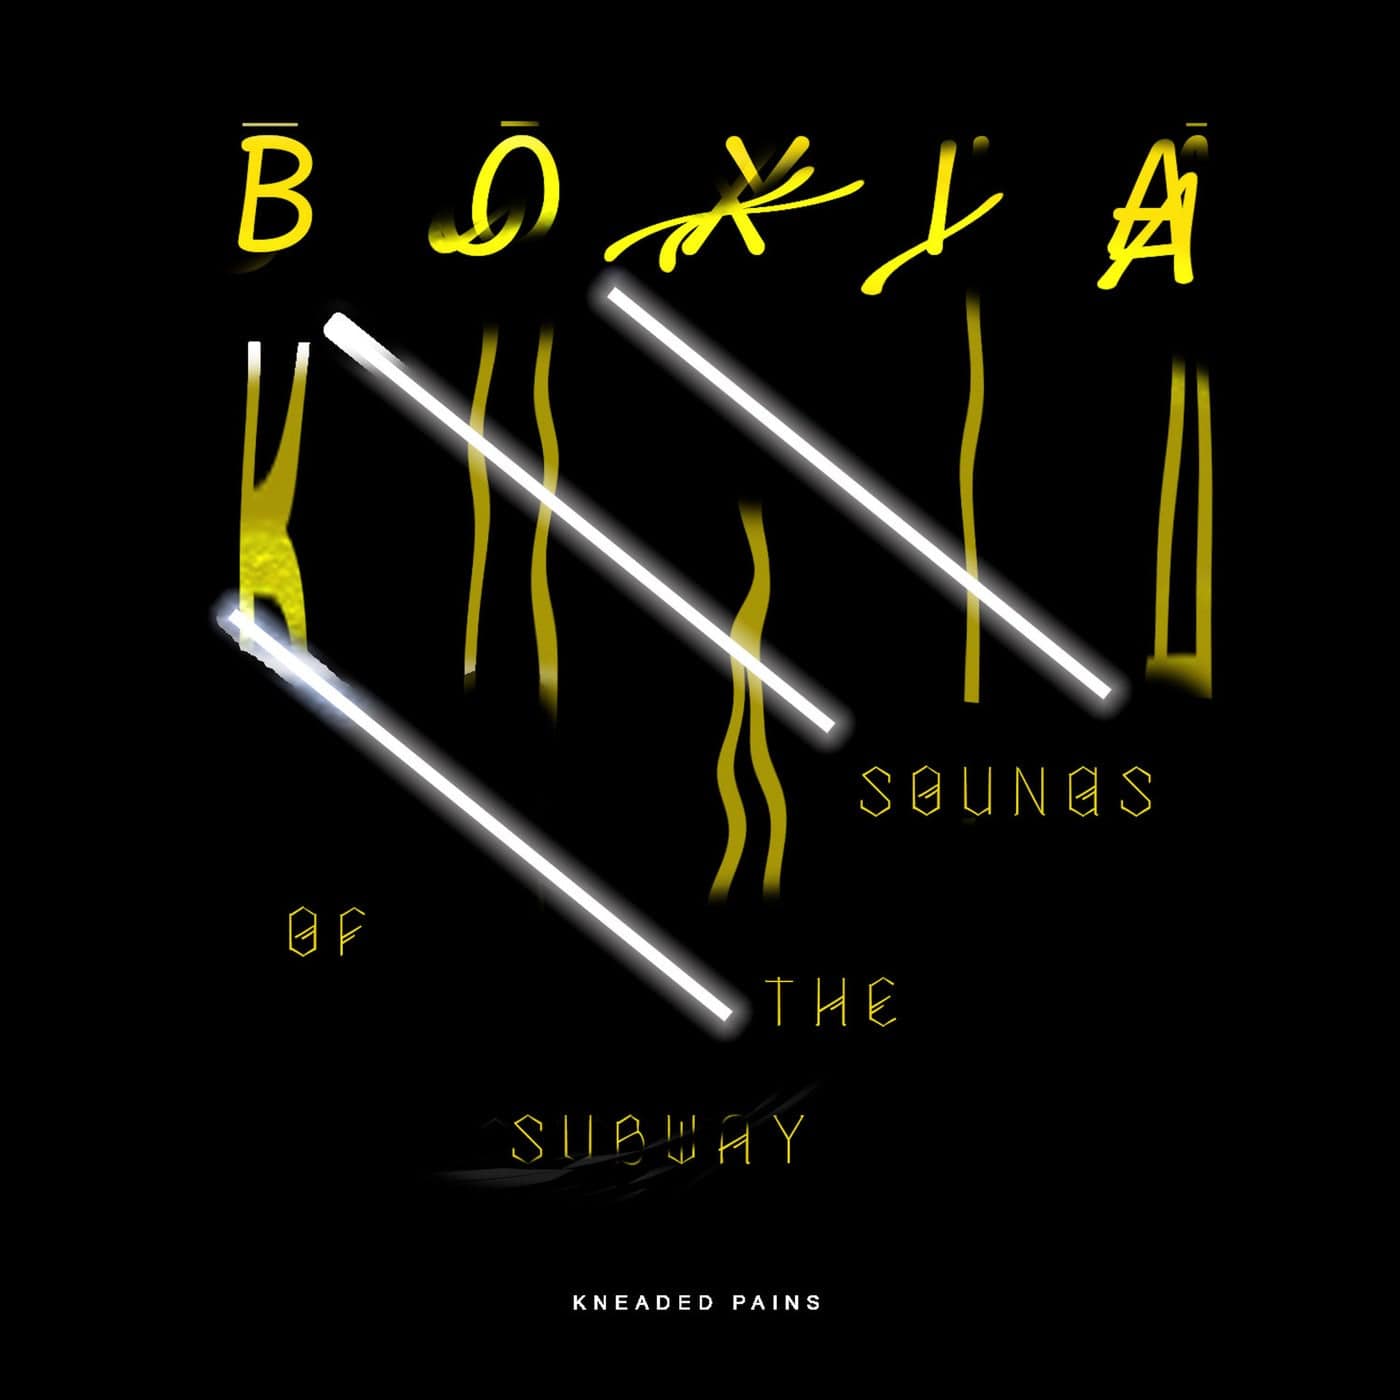 Download Boxia - Sounds Of The Subway on Electrobuzz